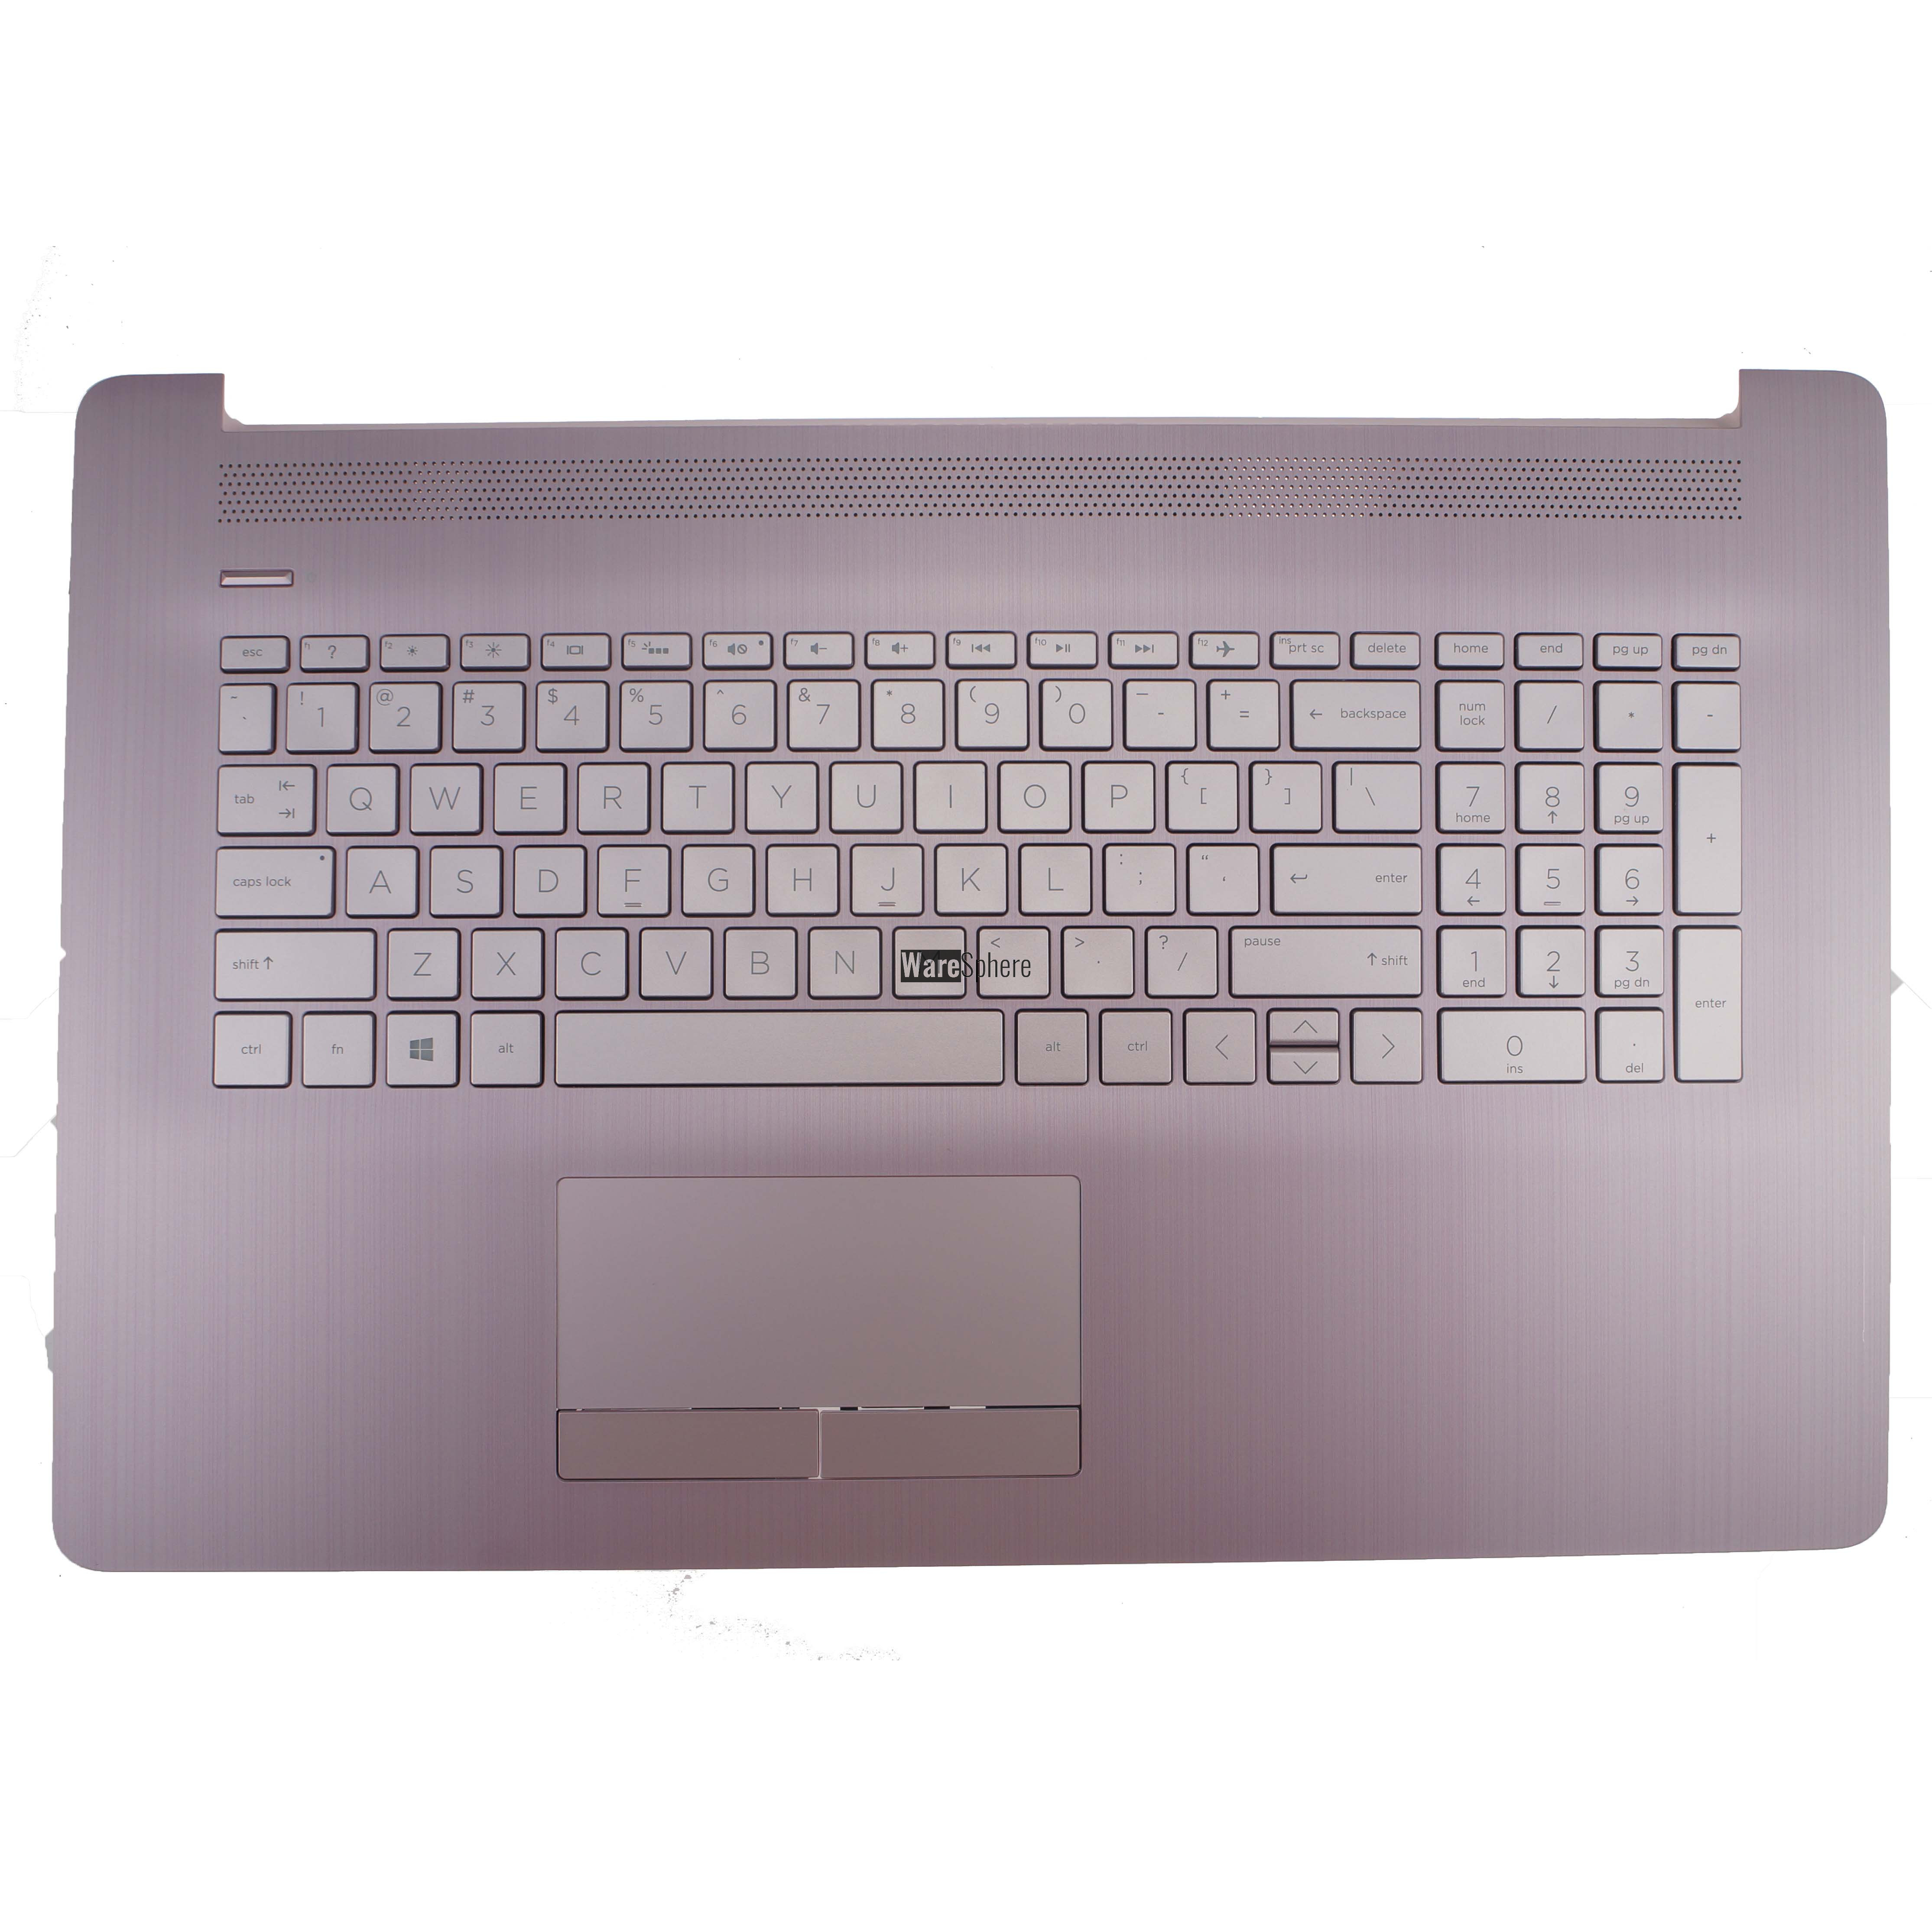 Top Cover Upper Case for HP 17-BY Palmrest With Backlit Keyboard 6070B1308107 L28089-001 Pink US